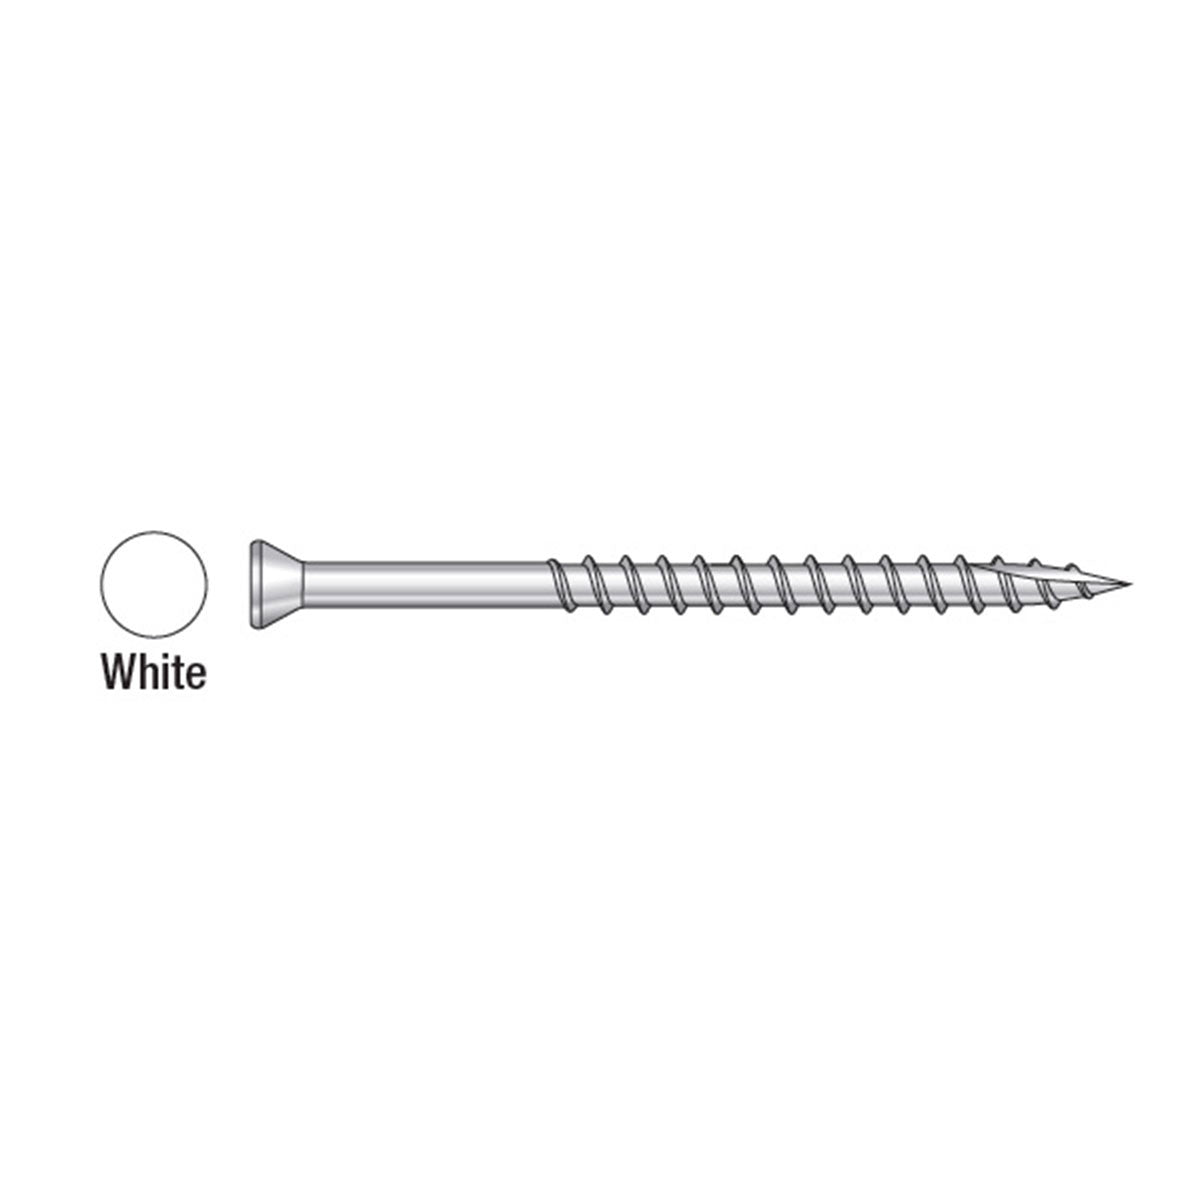 S07225FT70WH01 #7 1-5/8" Type 305 Stainless Steel 6 Lobe Drive Trim Head Screws Painted White - 70-CT Pack